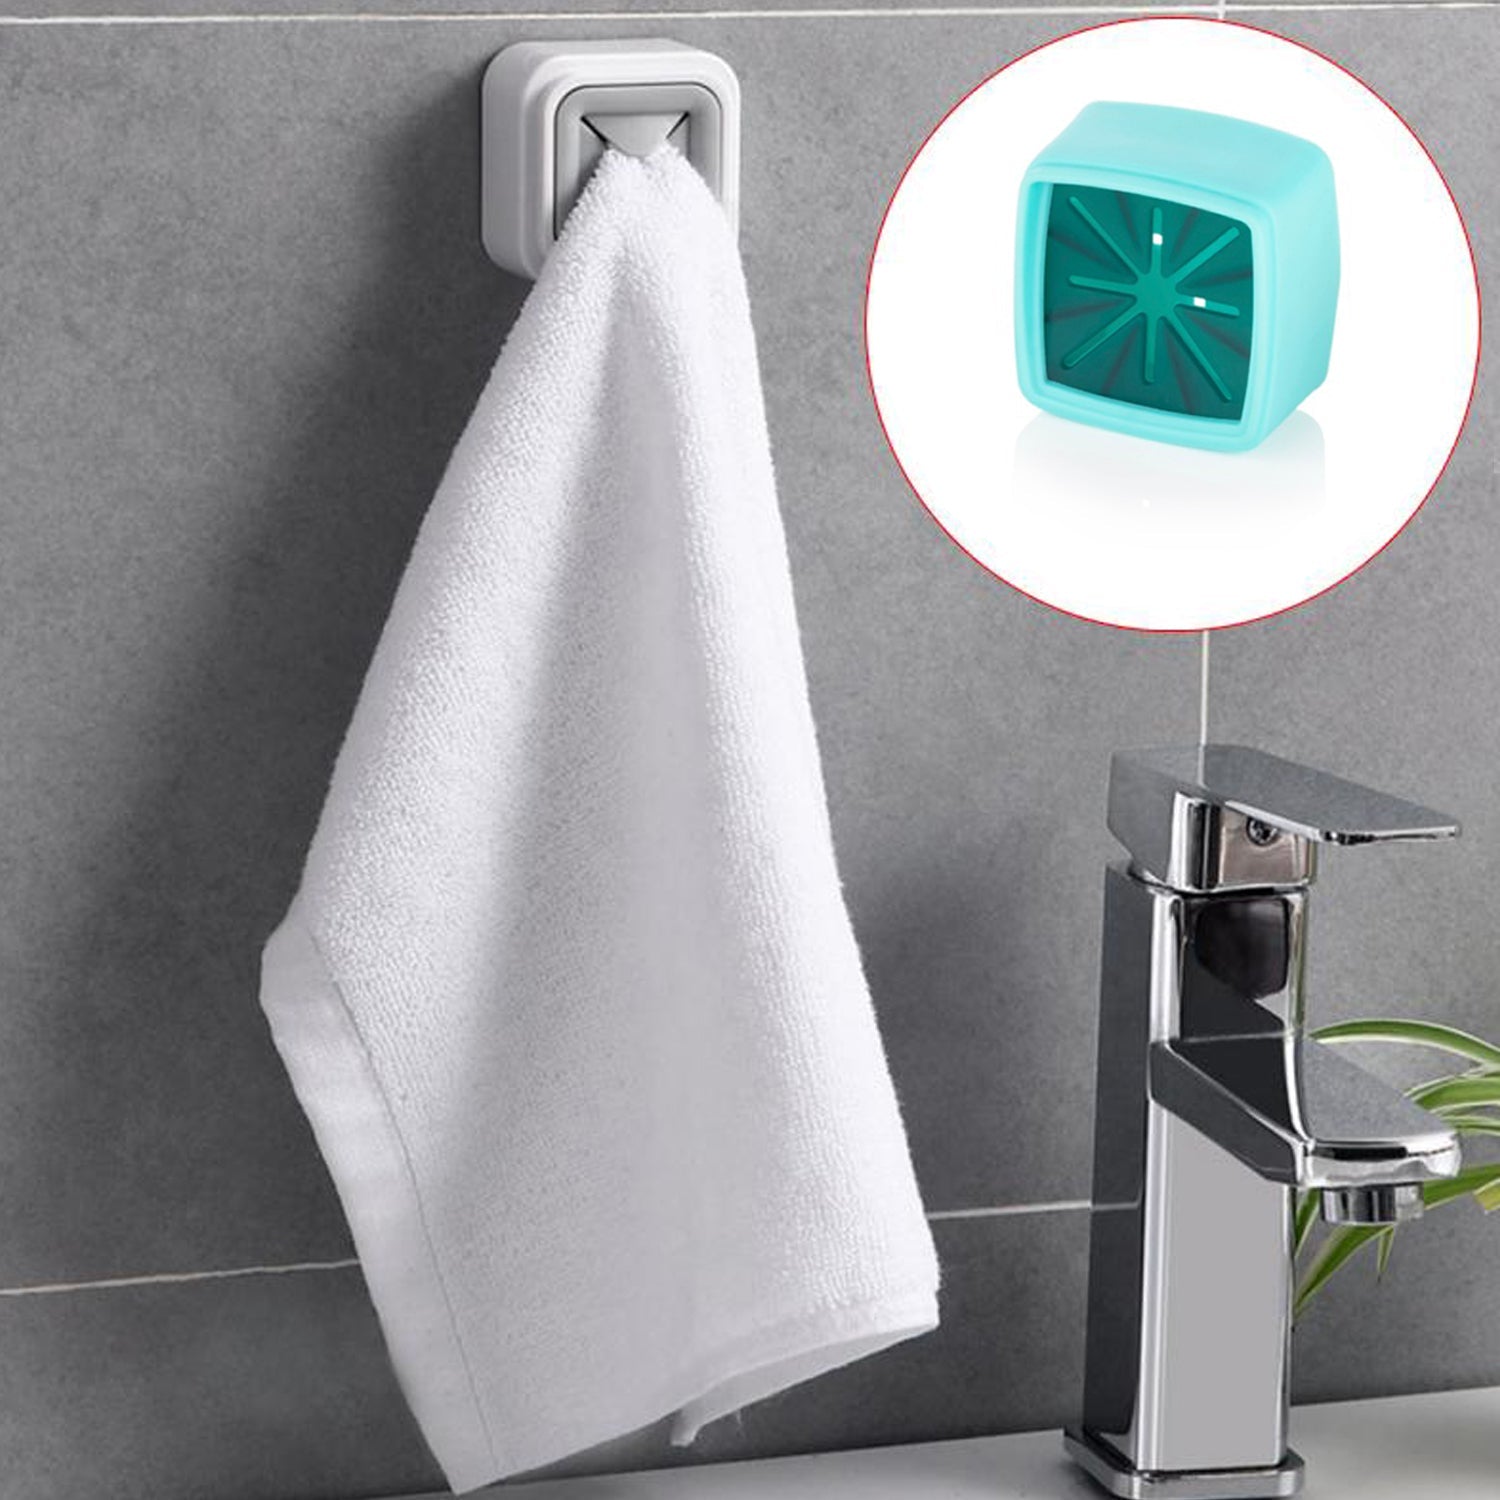 4 Pc Towel Holder mostly used in all kinds of bathroom purposes for hanging and placing towels for easy take-in and take-out purposes.